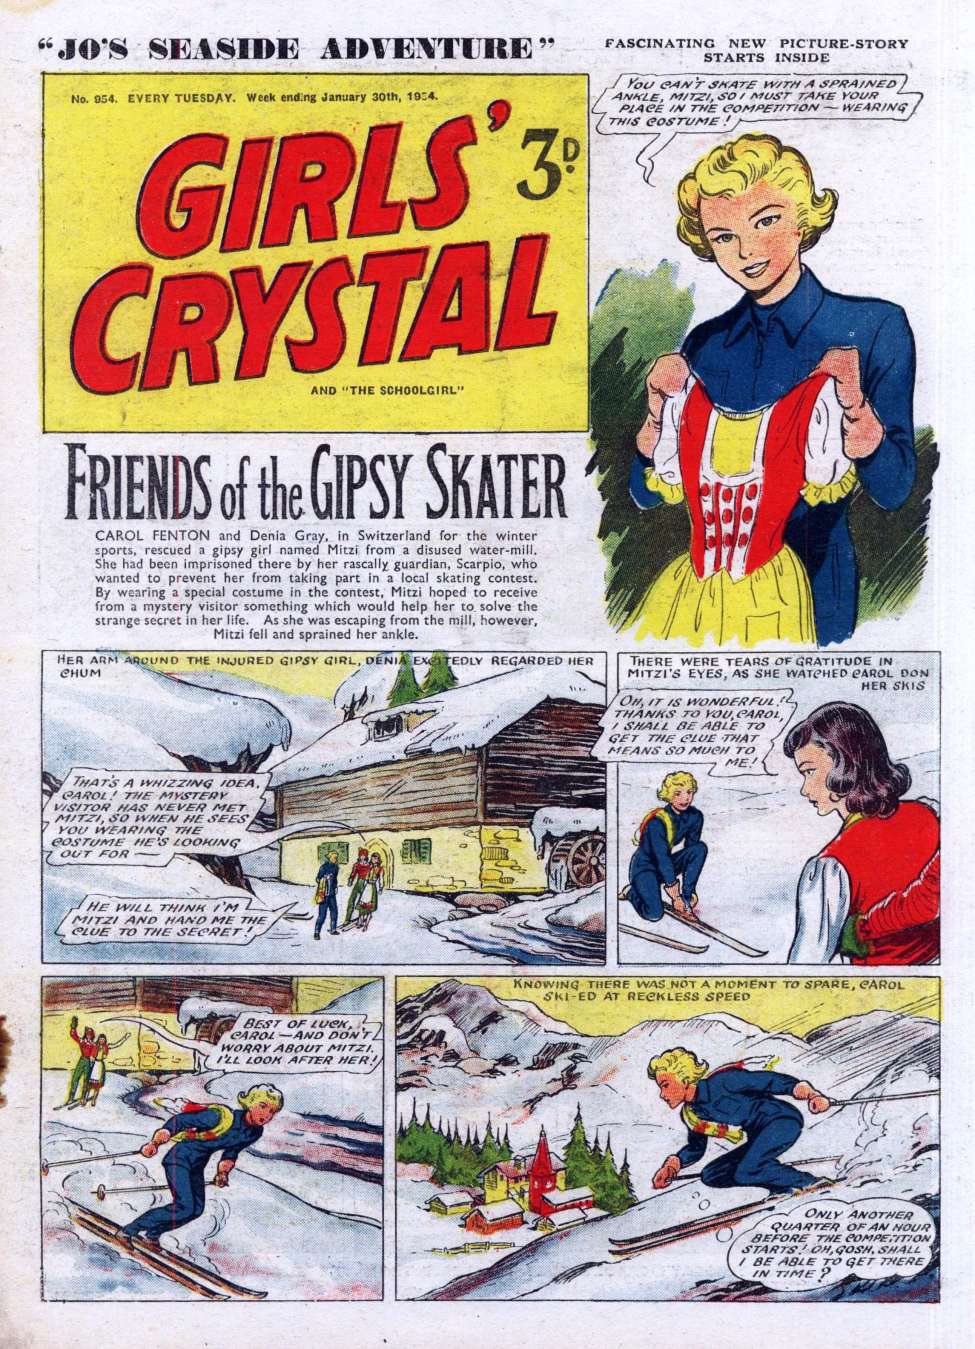 Book Cover For Girls' Crystal 954